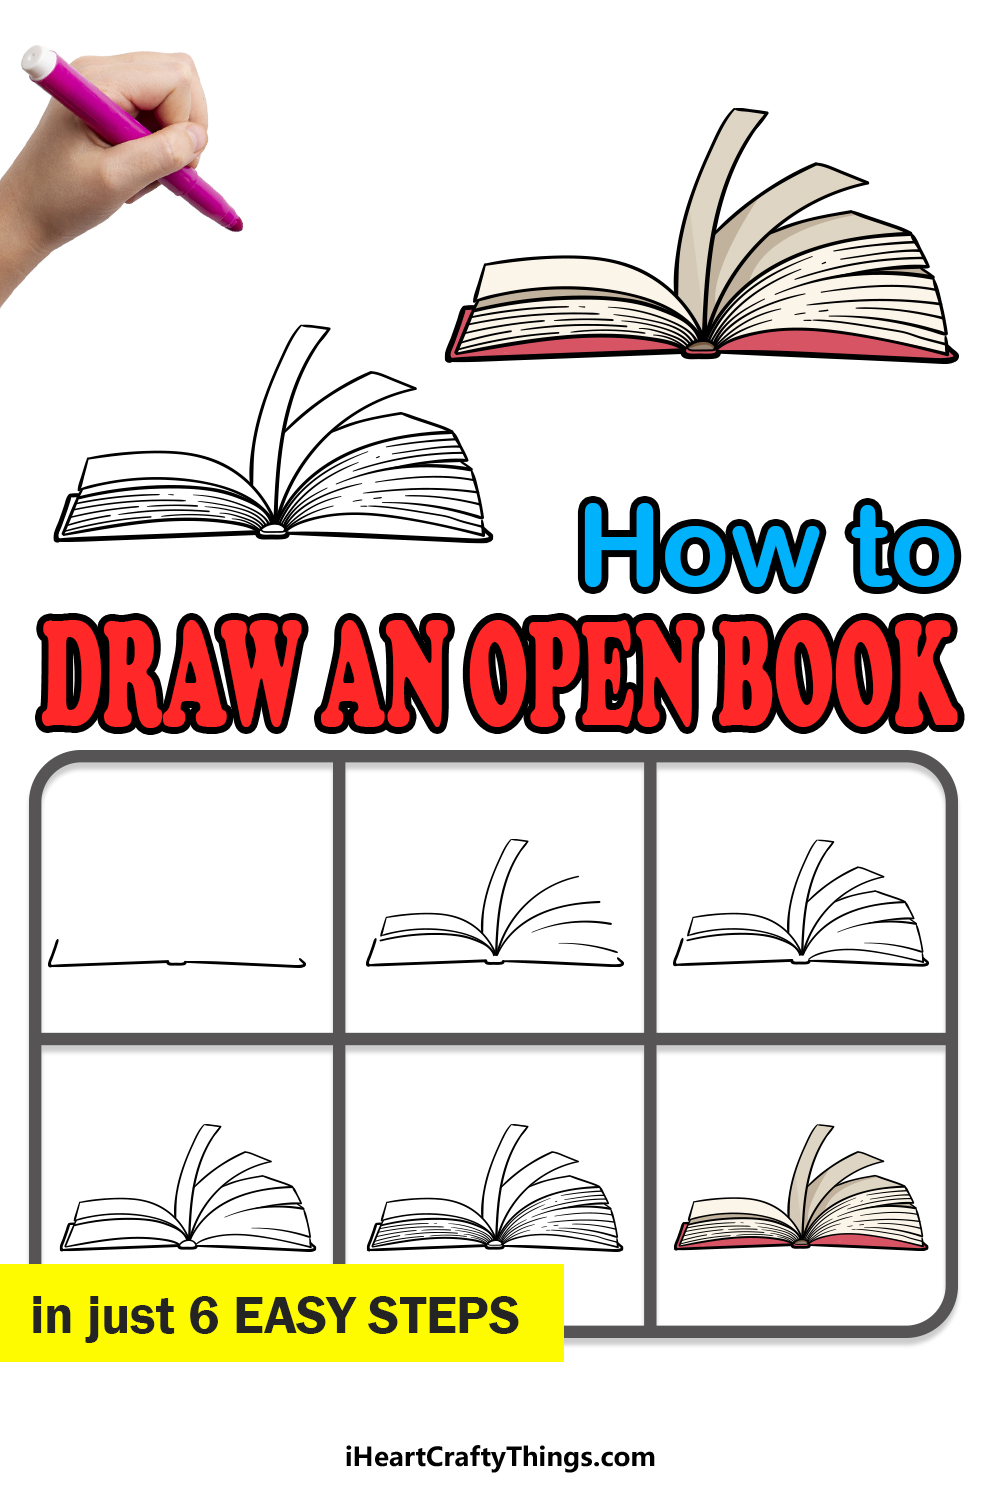 how to draw an open book in 6 easy steps